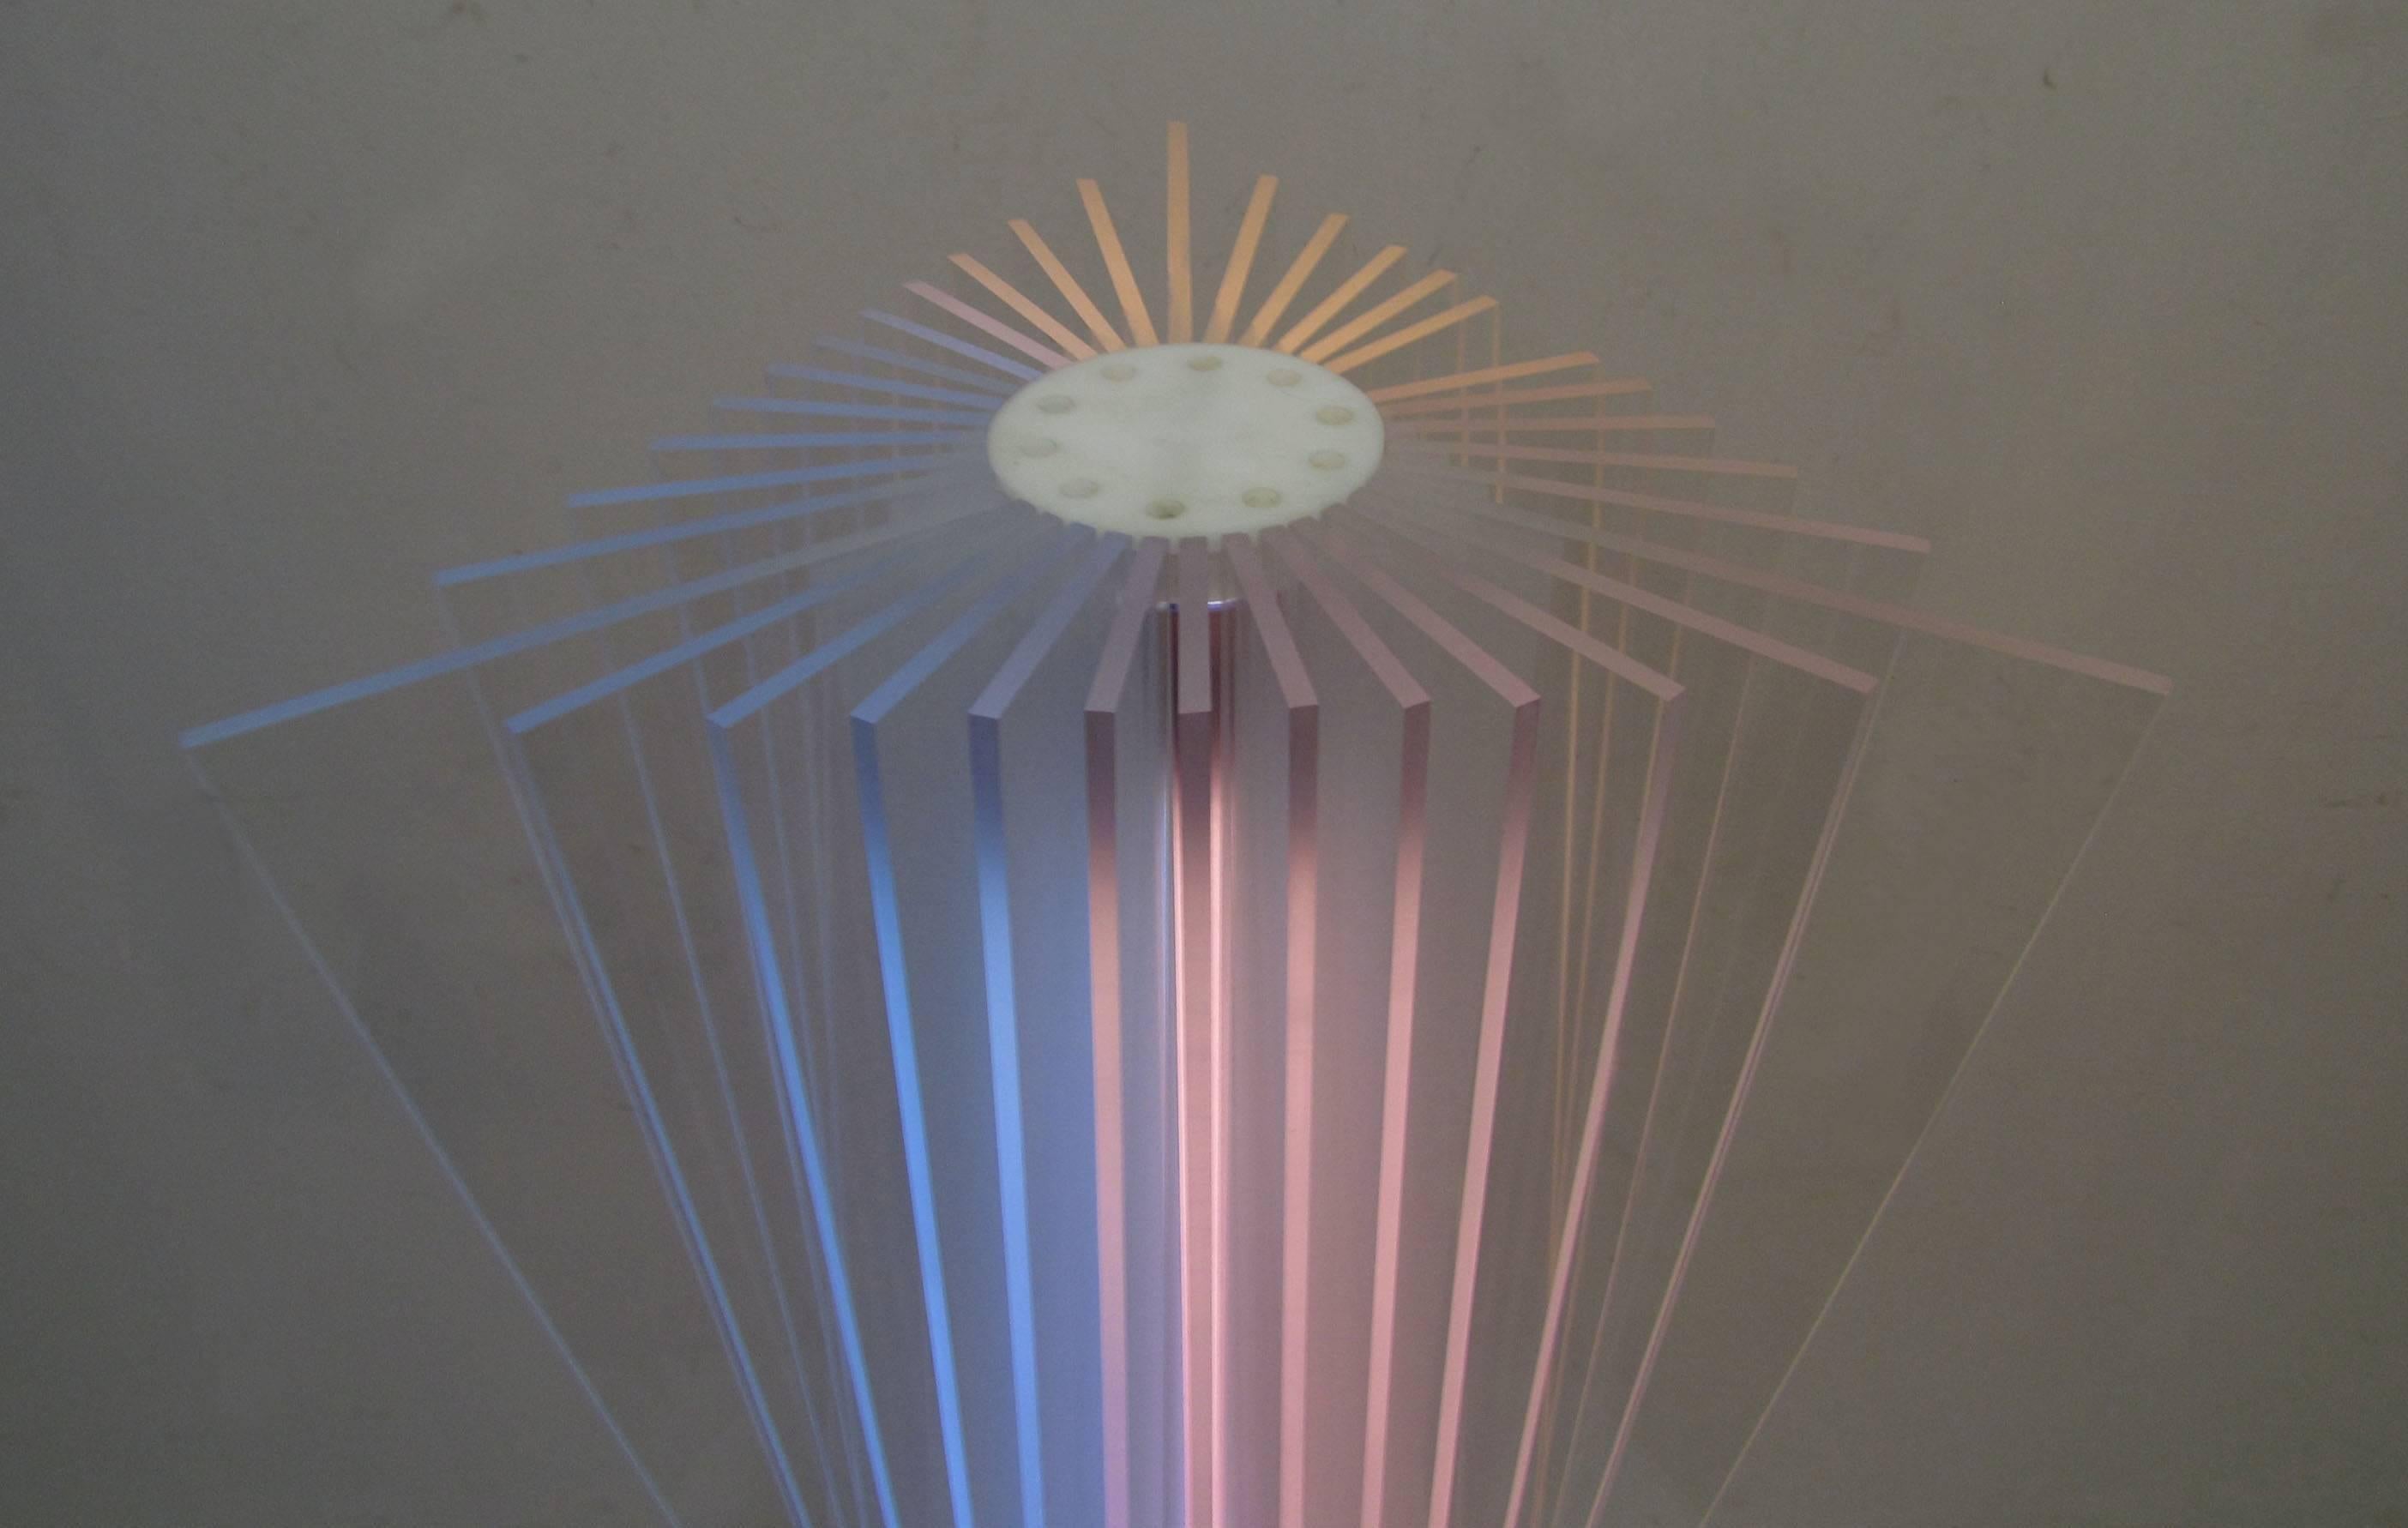 American Lucite Light Sculpture from the Estate of Norman Mercer, circa 1980s